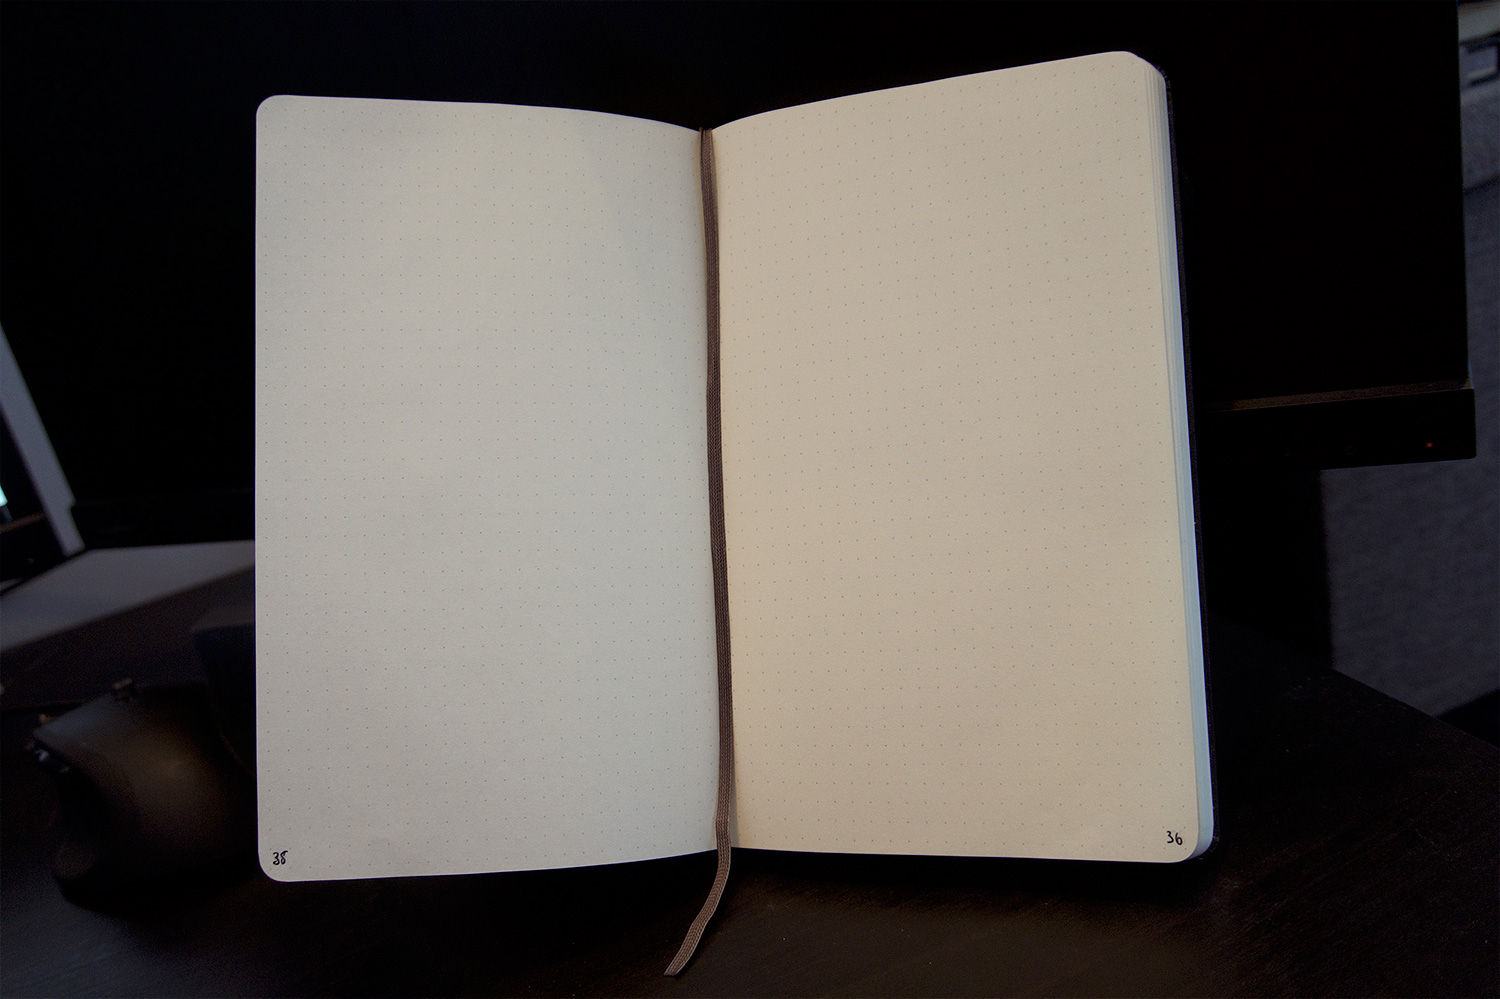 Dotted inside of the moleskin notebook